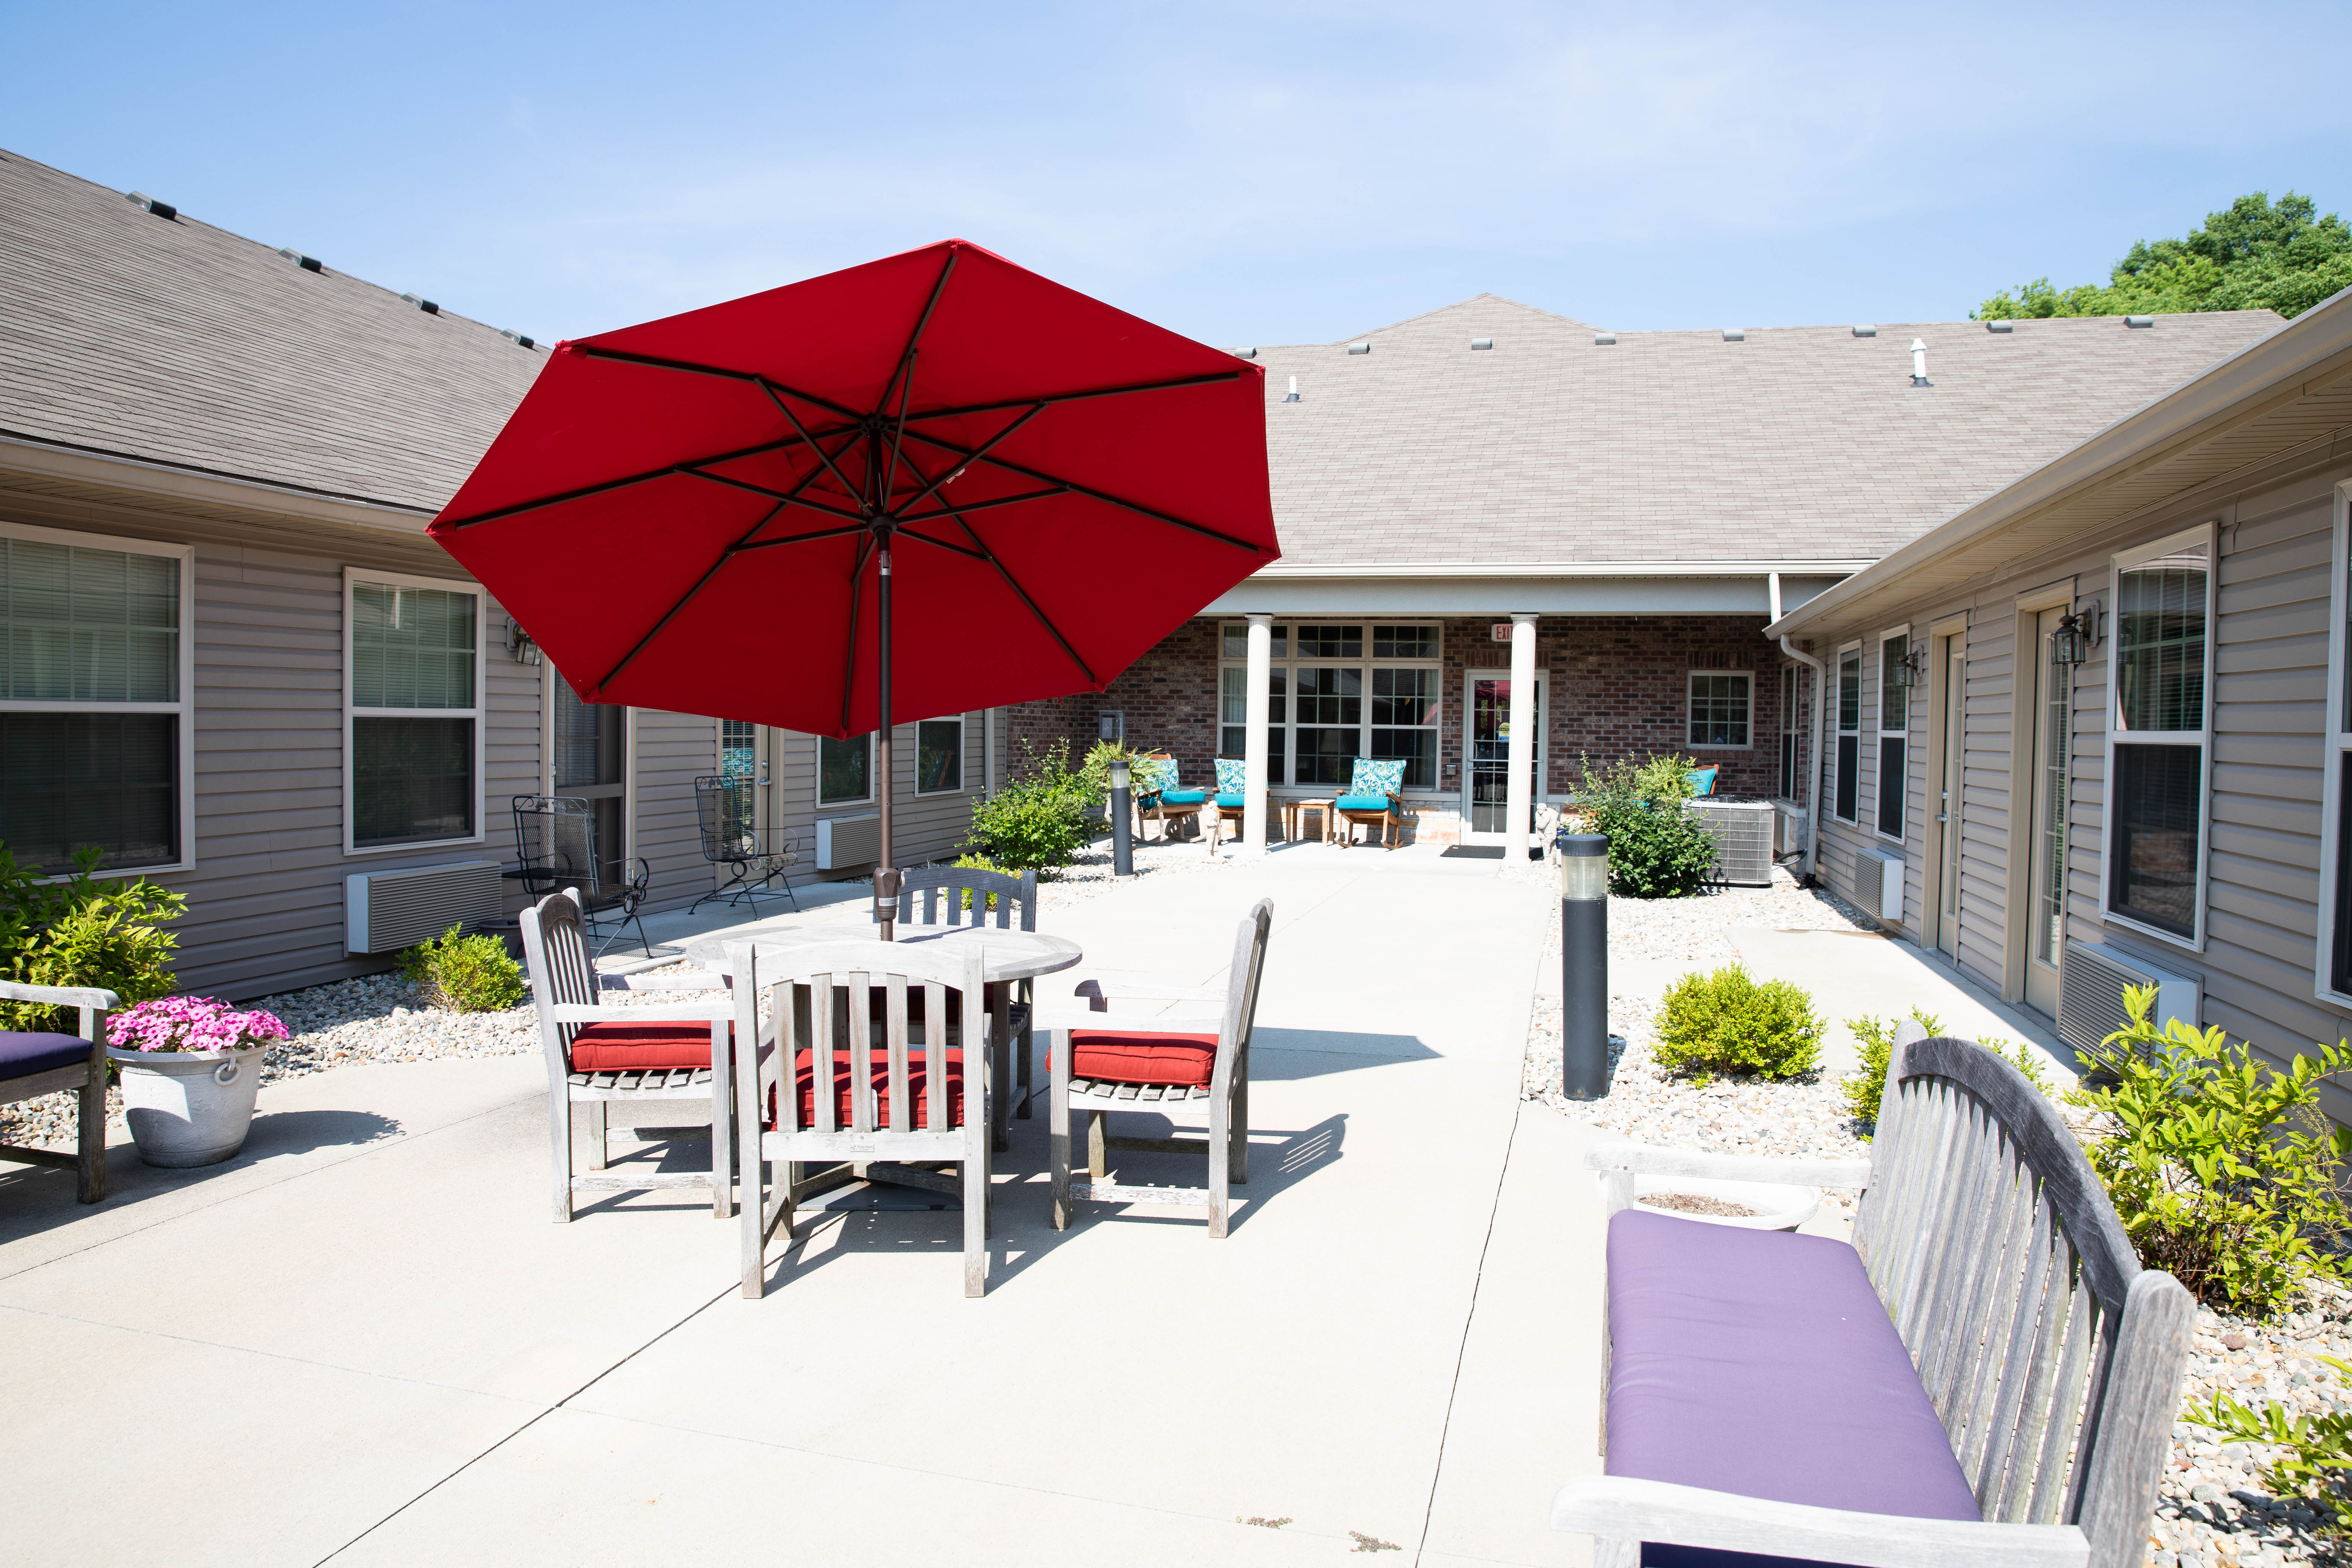 Brownsburg Meadows Assisted Living image